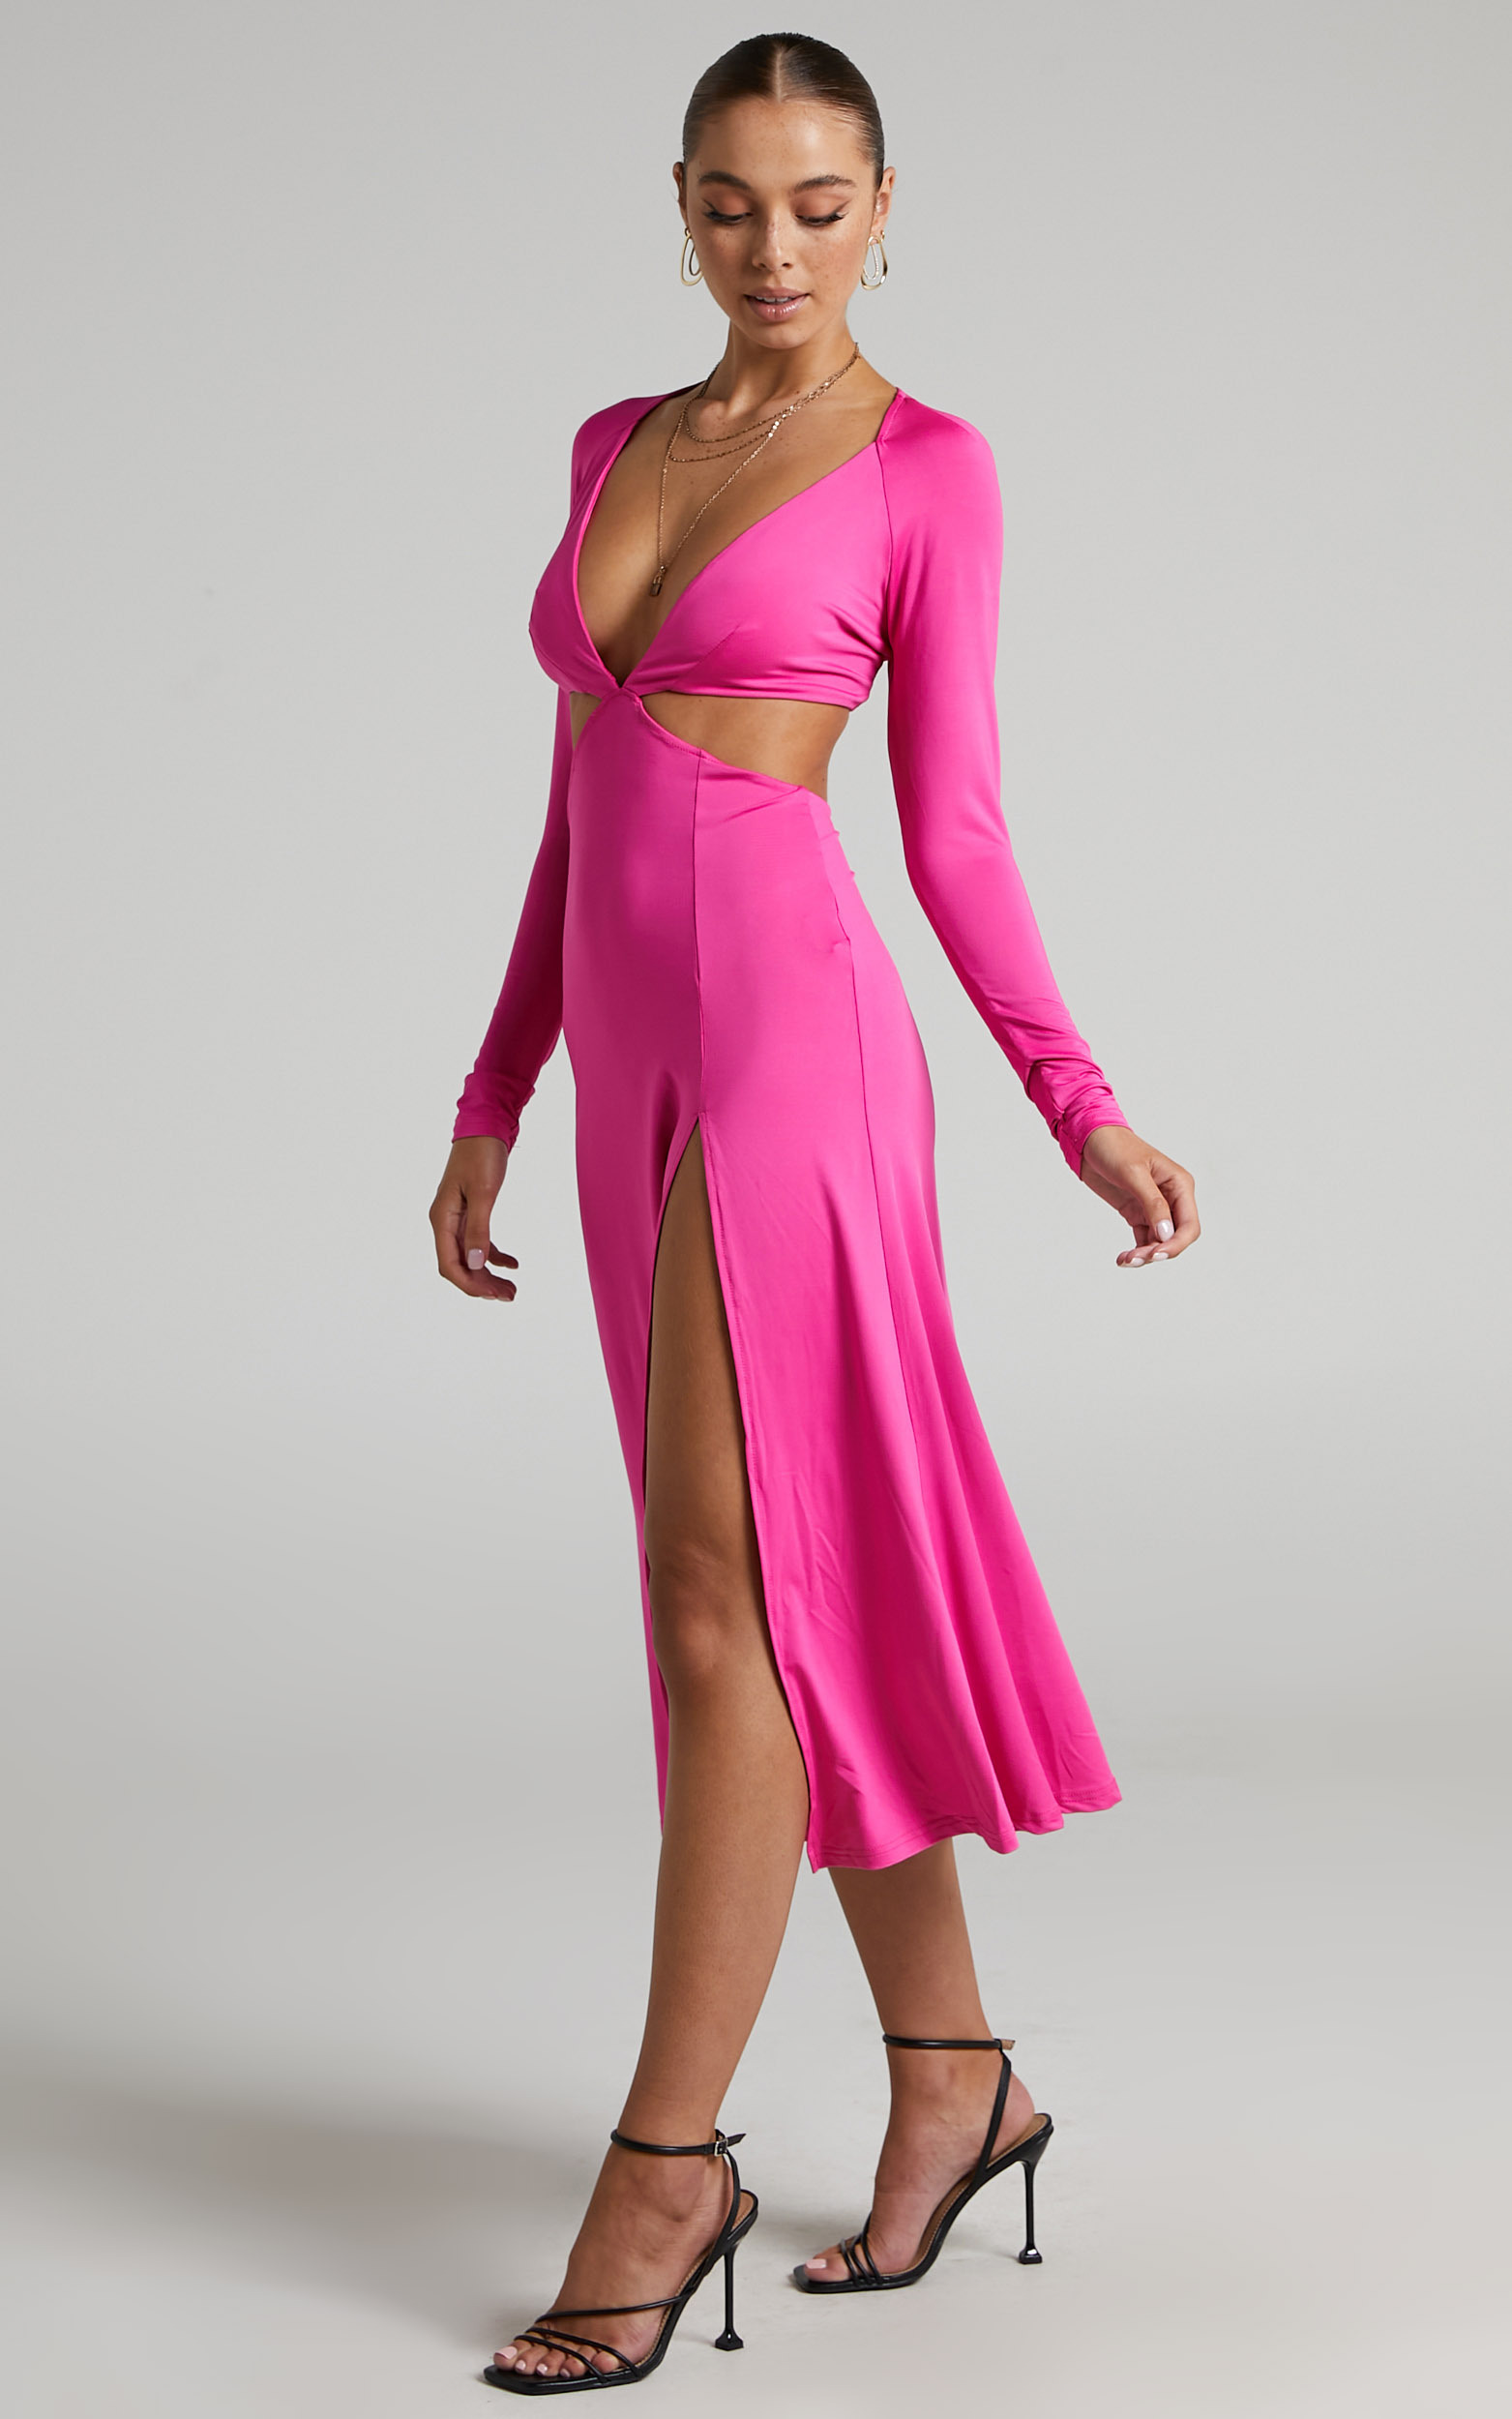 Arleine Front Cut Out Tie Back Long Sleeve Midi Dress in Pink - 06, PNK1, hi-res image number null